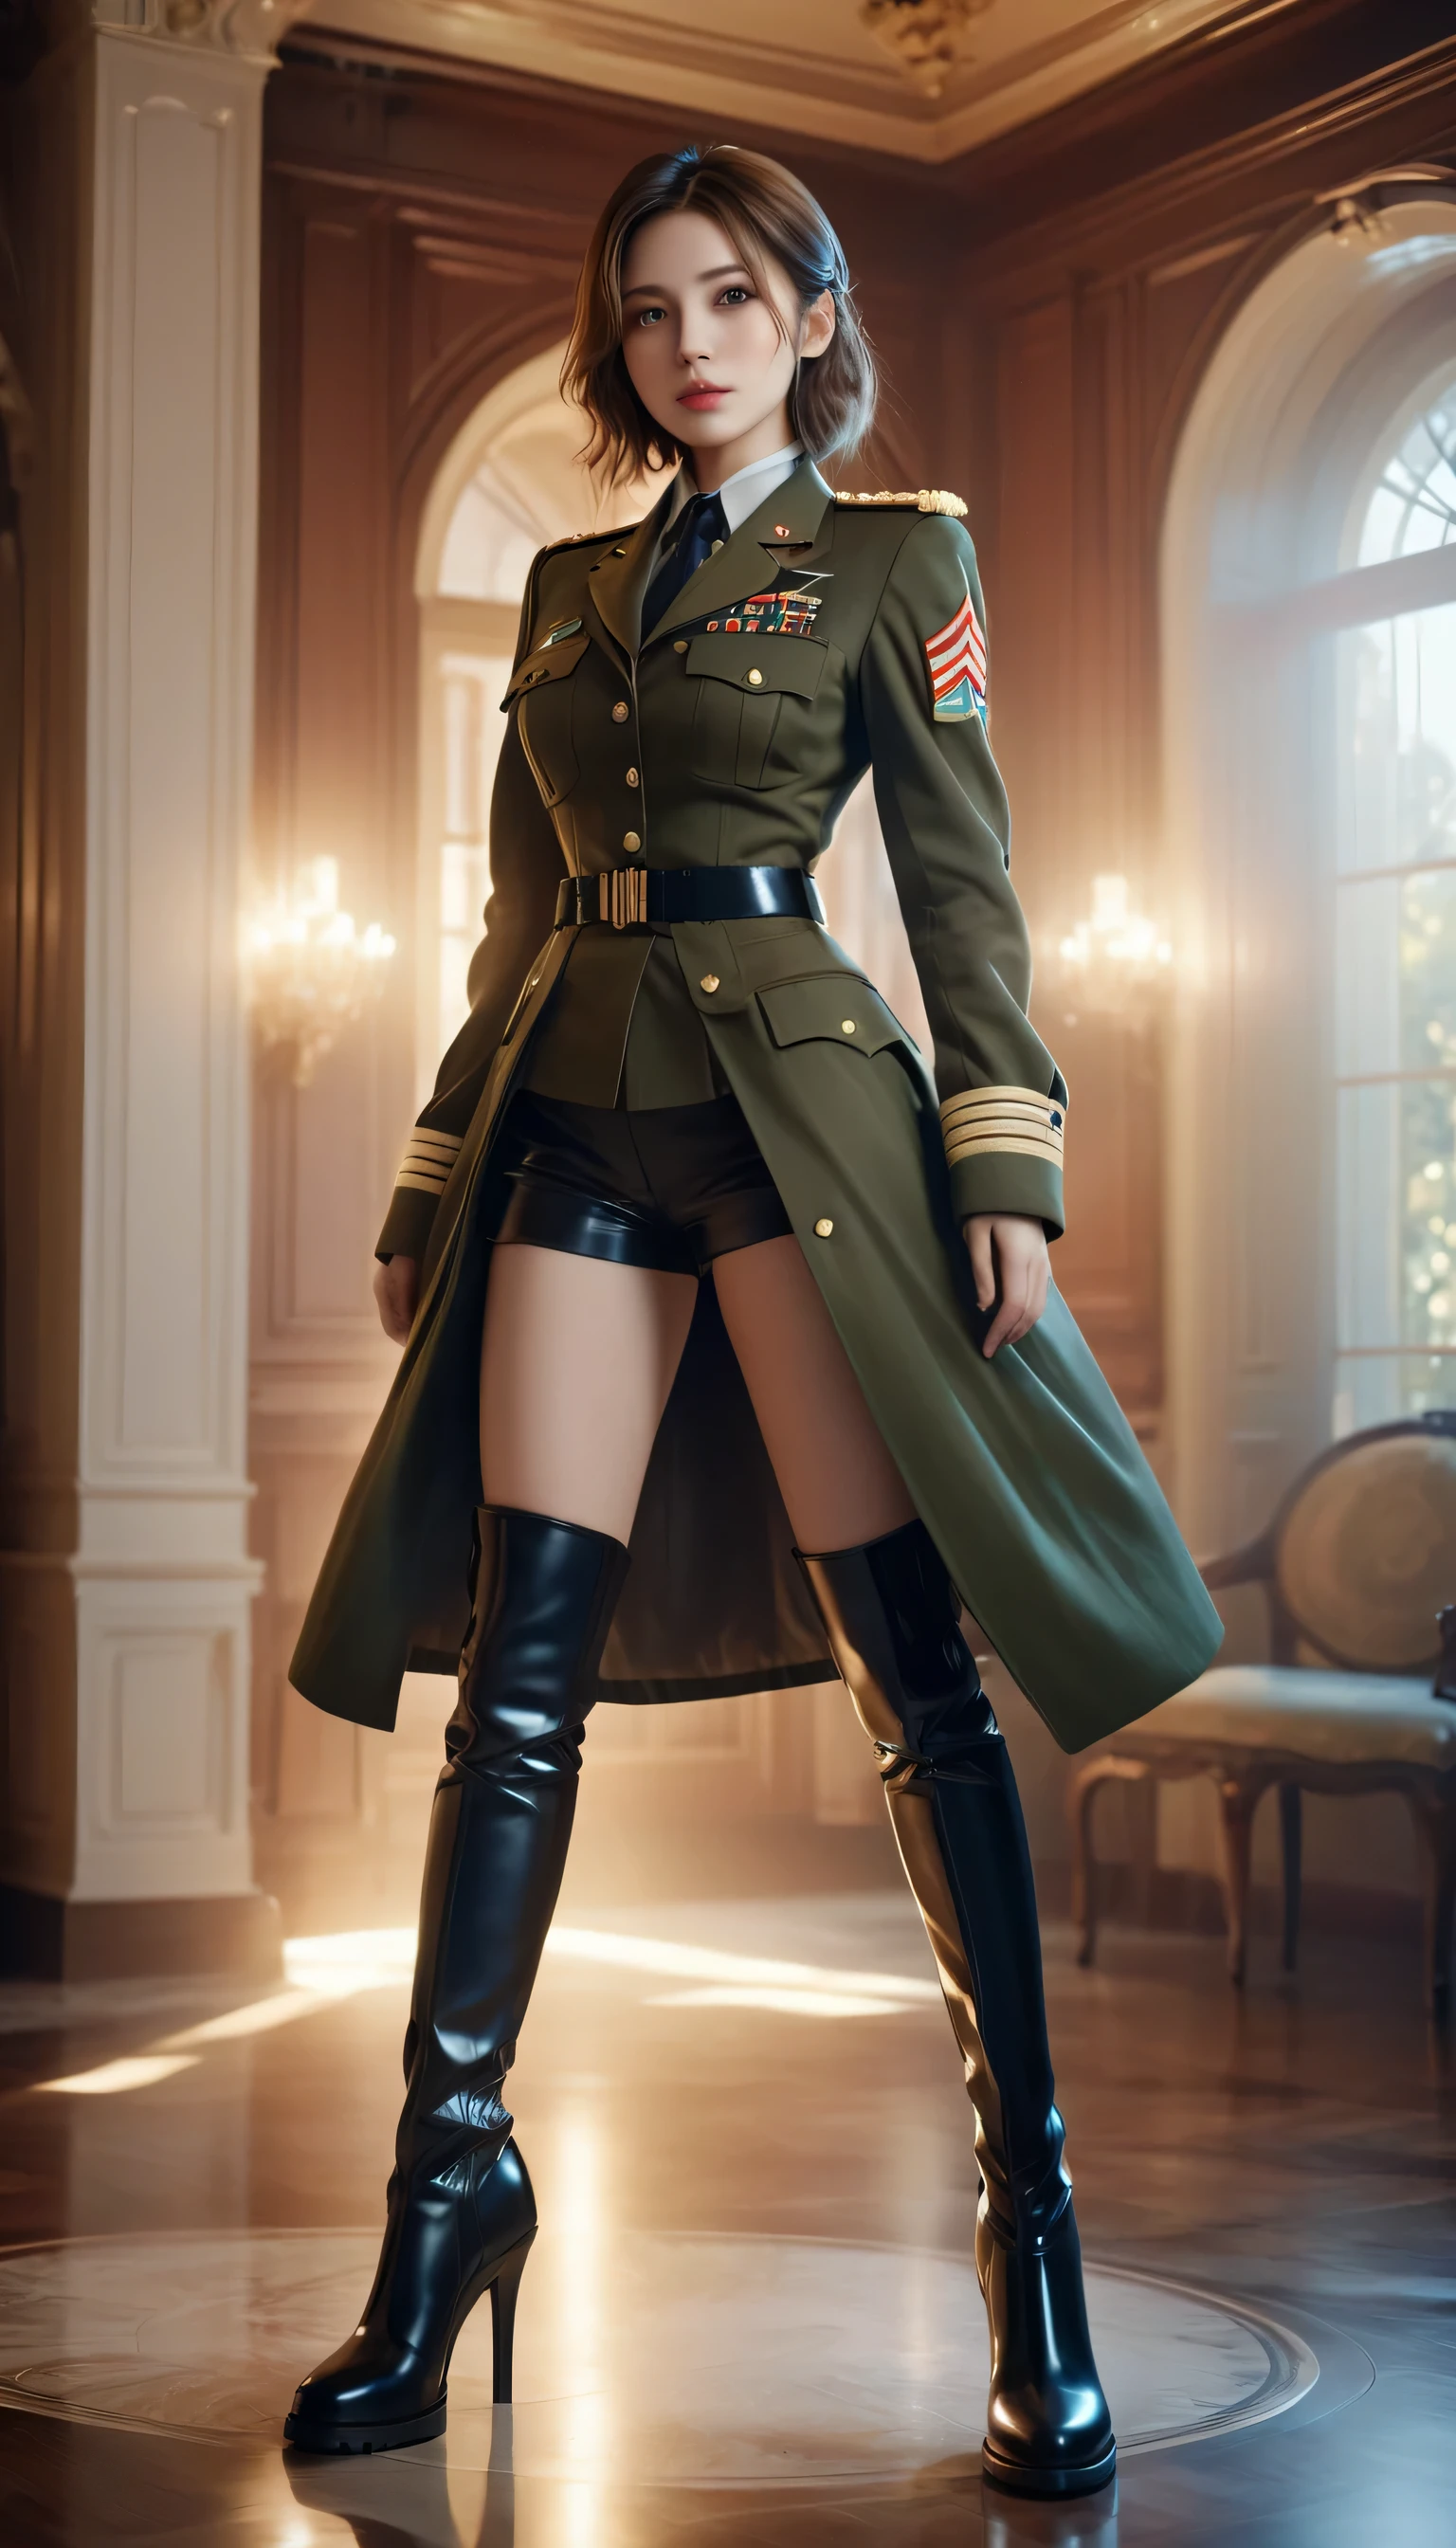 1 girl,wearing military uniform，military boots，Good player,4K, high resolution, masterpiece, best quality, head:1.3,((Hasselblad Photography)), Delicate skin, sharp focus, (movie lighting), soft light, Dynamic angle, [:(Detailed face:1.2):0.2], big breasts,(((Inside the mansion))),